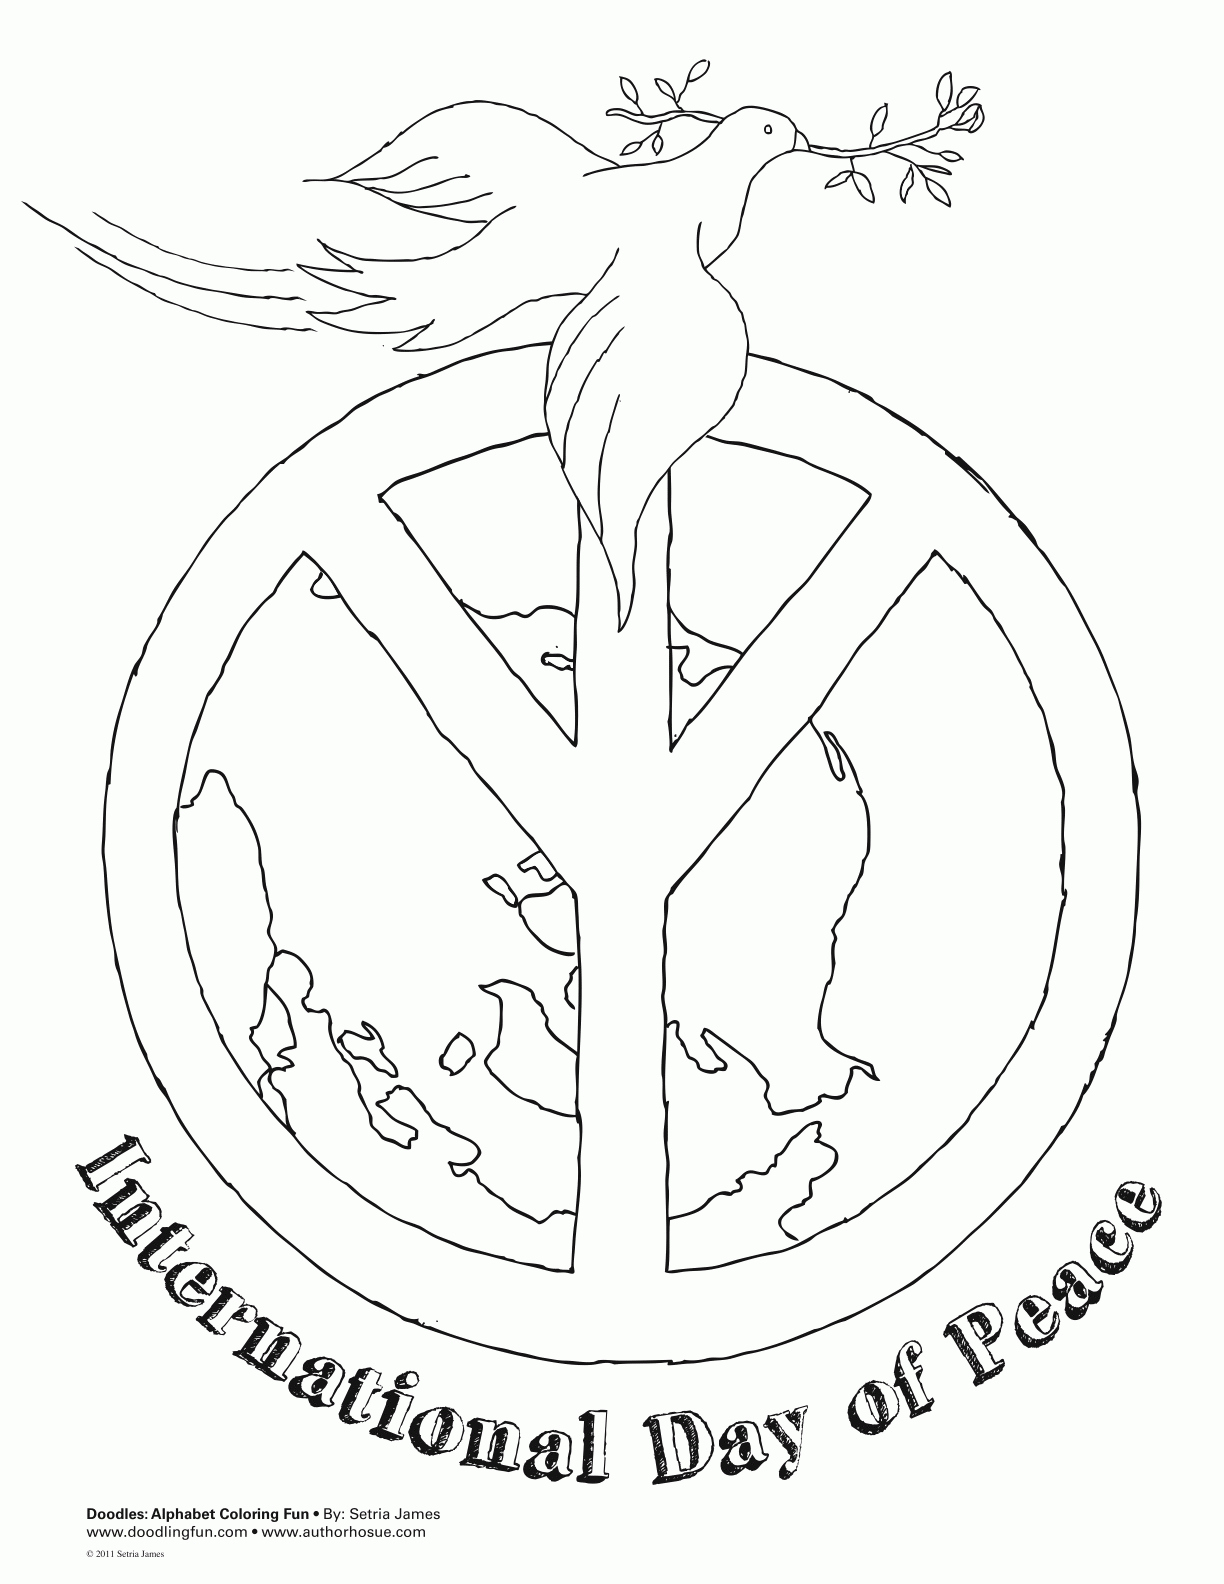 10 Pics of Peace Day Coloring Pages - International Peace Day ...